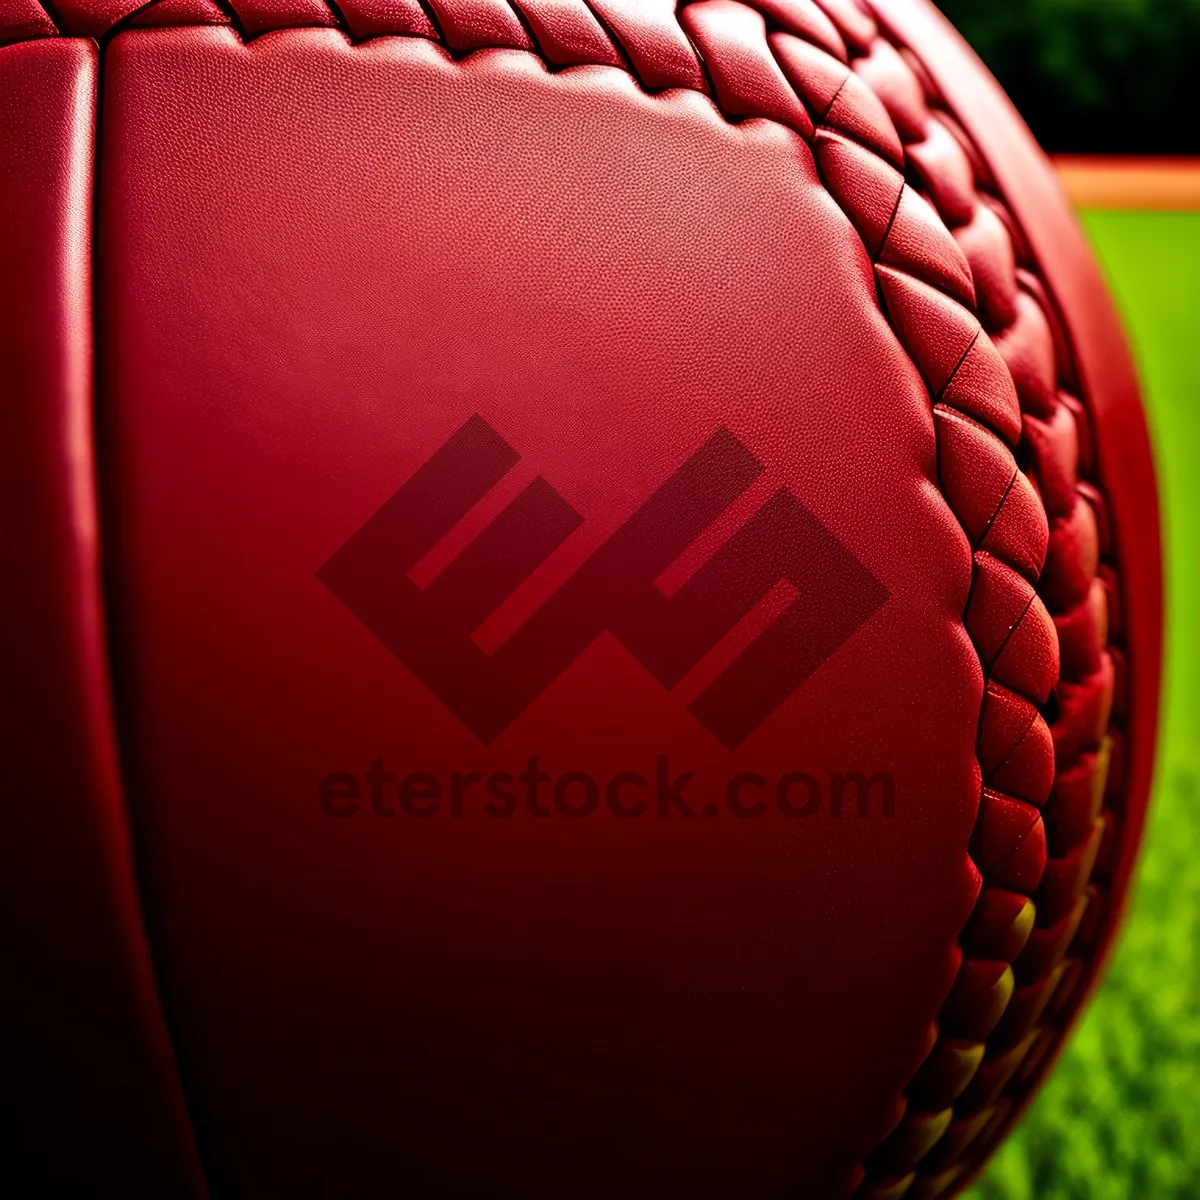 Picture of Baseball Glove and Ball on Grass